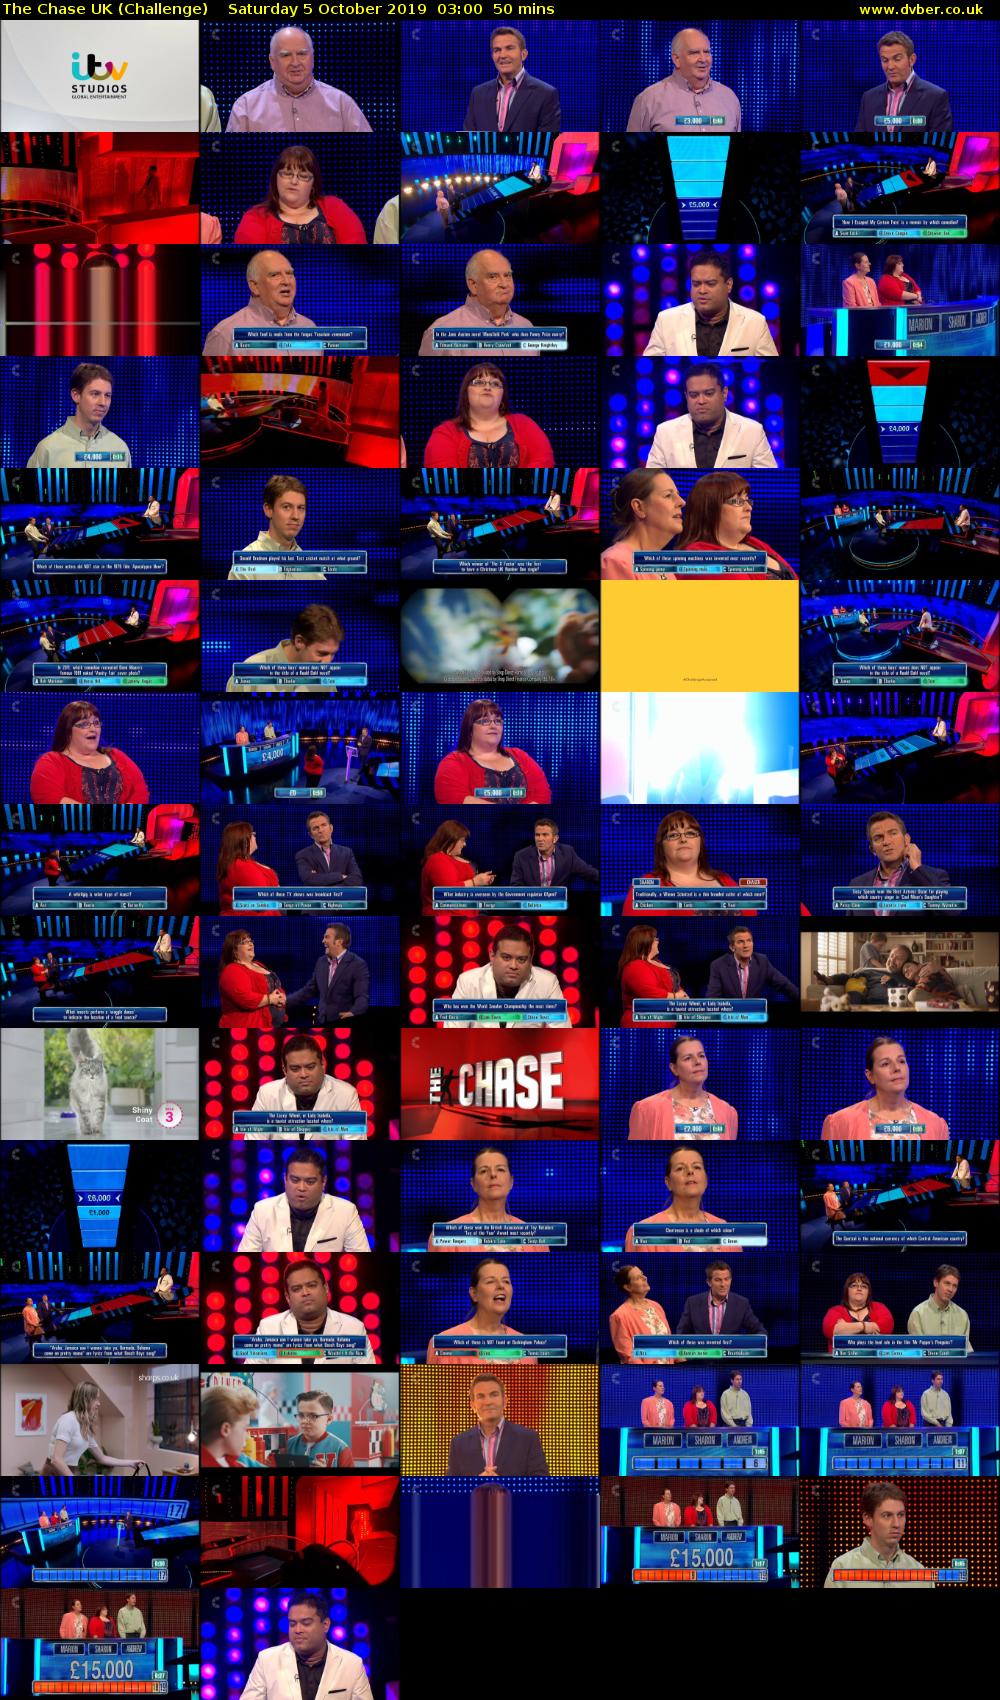 The Chase UK (Challenge) Saturday 5 October 2019 03:00 - 03:50